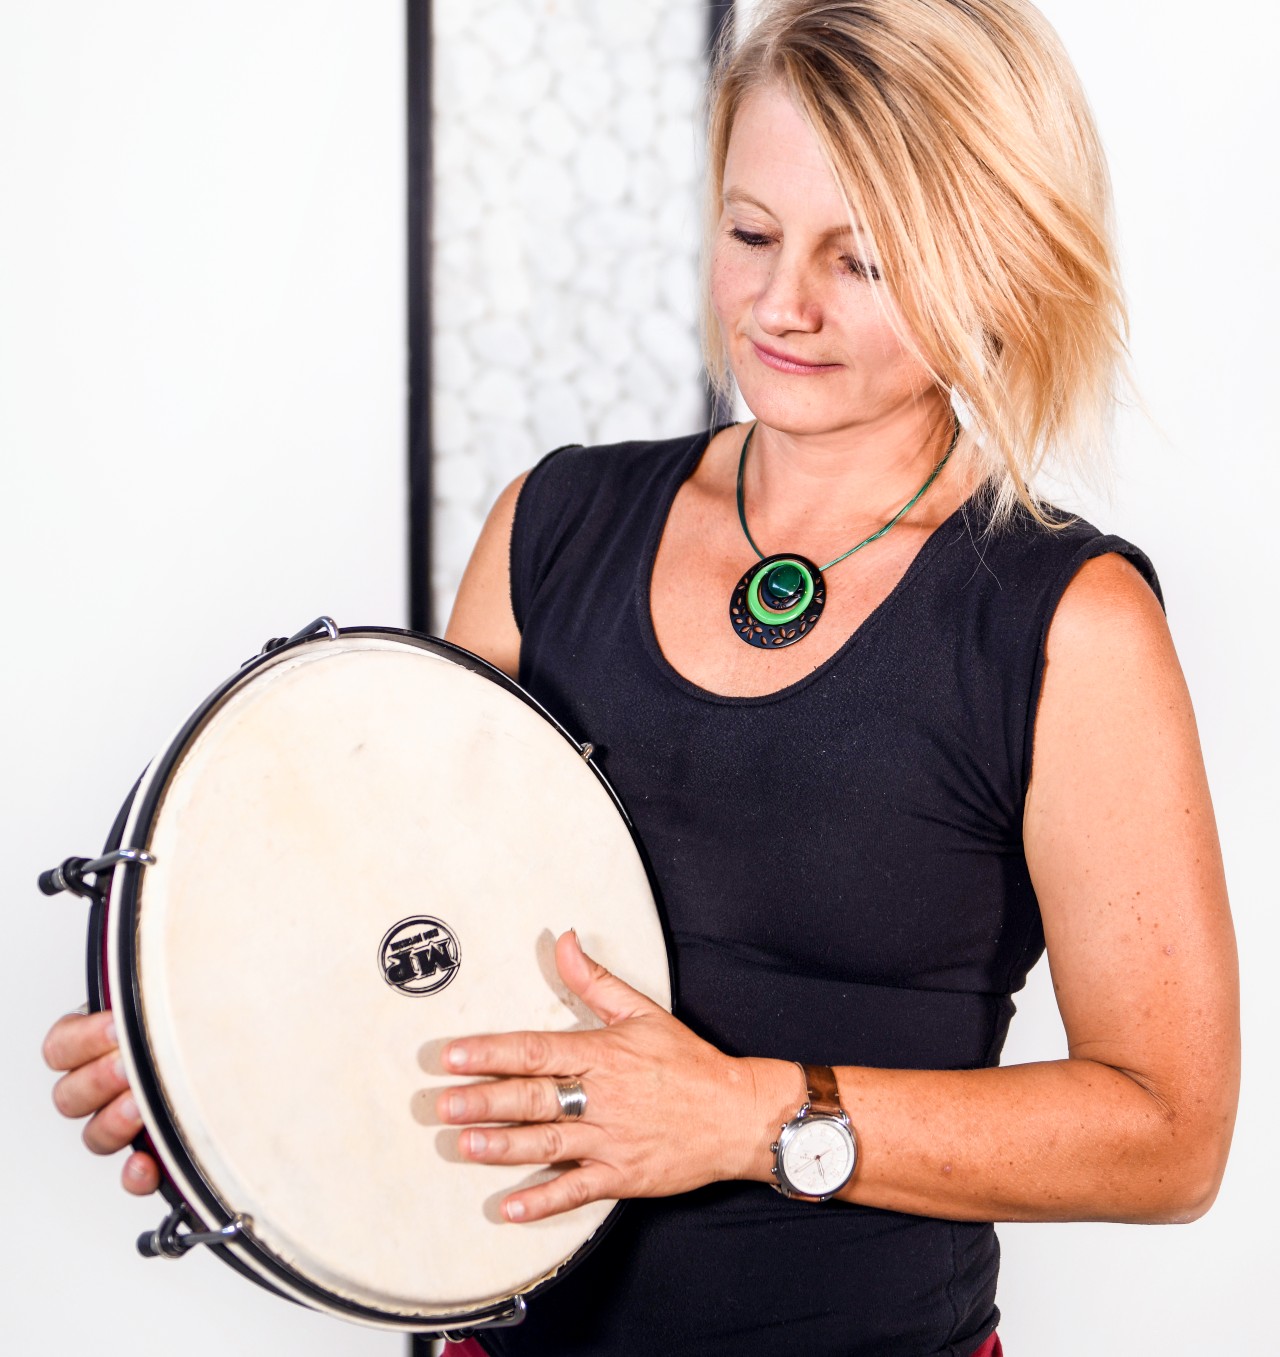 Associate Professor in Music Therapy at the University of Melbourne Jeanette Tamplin. 